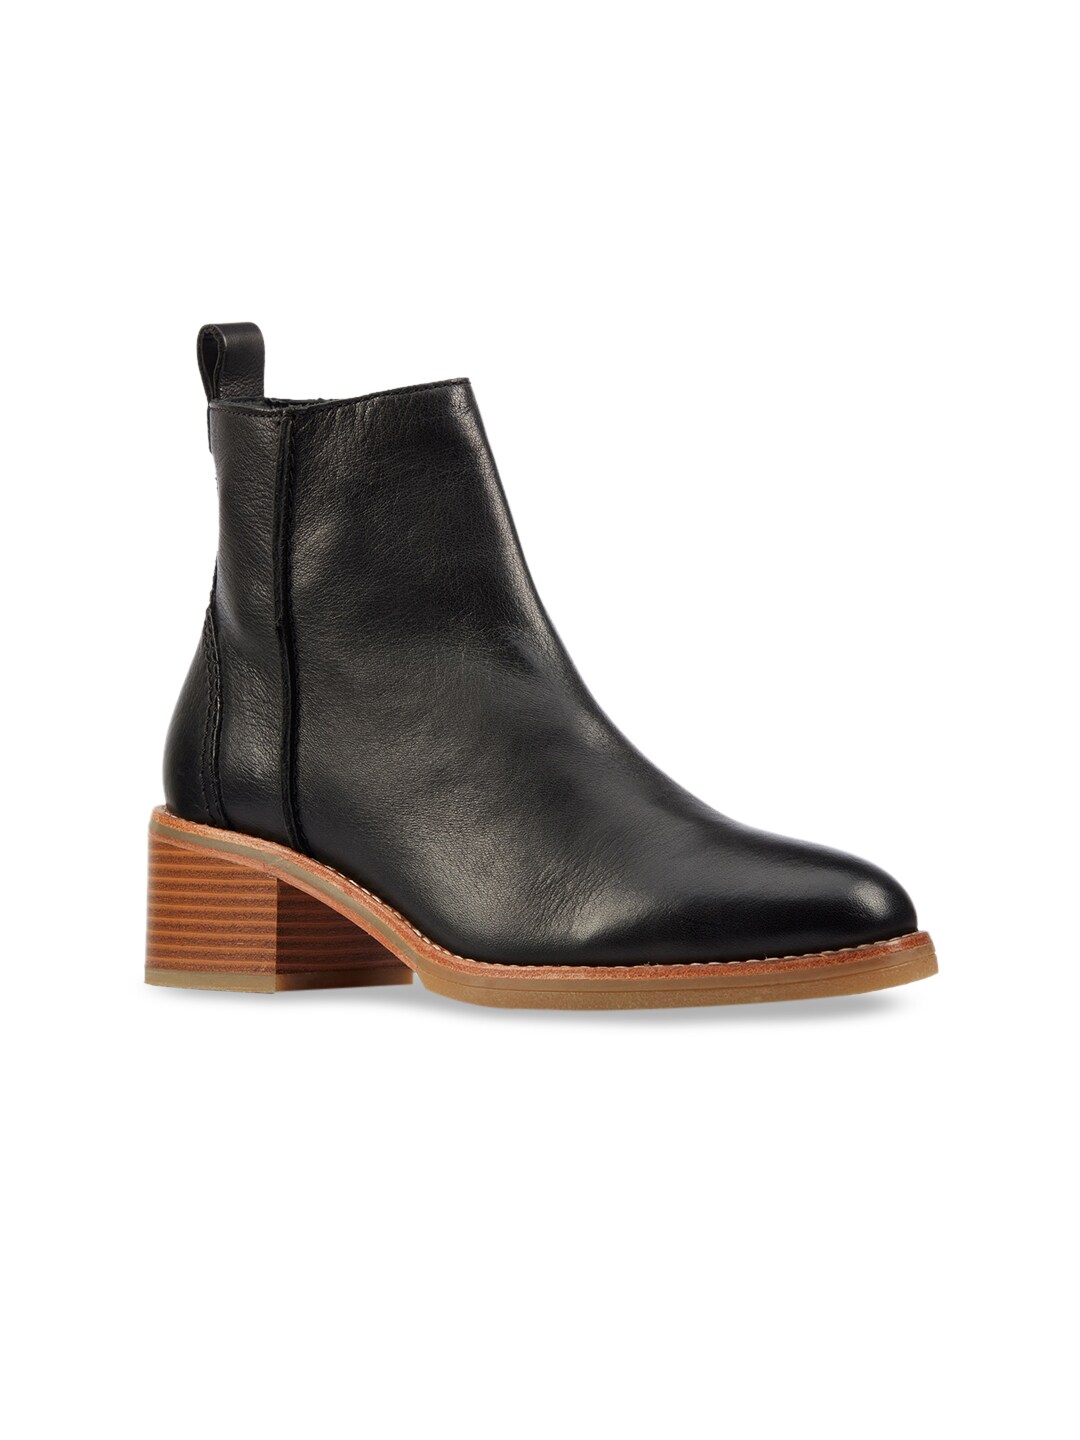 Clarks Black Leather High-Top Block Heeled Boots Price in India